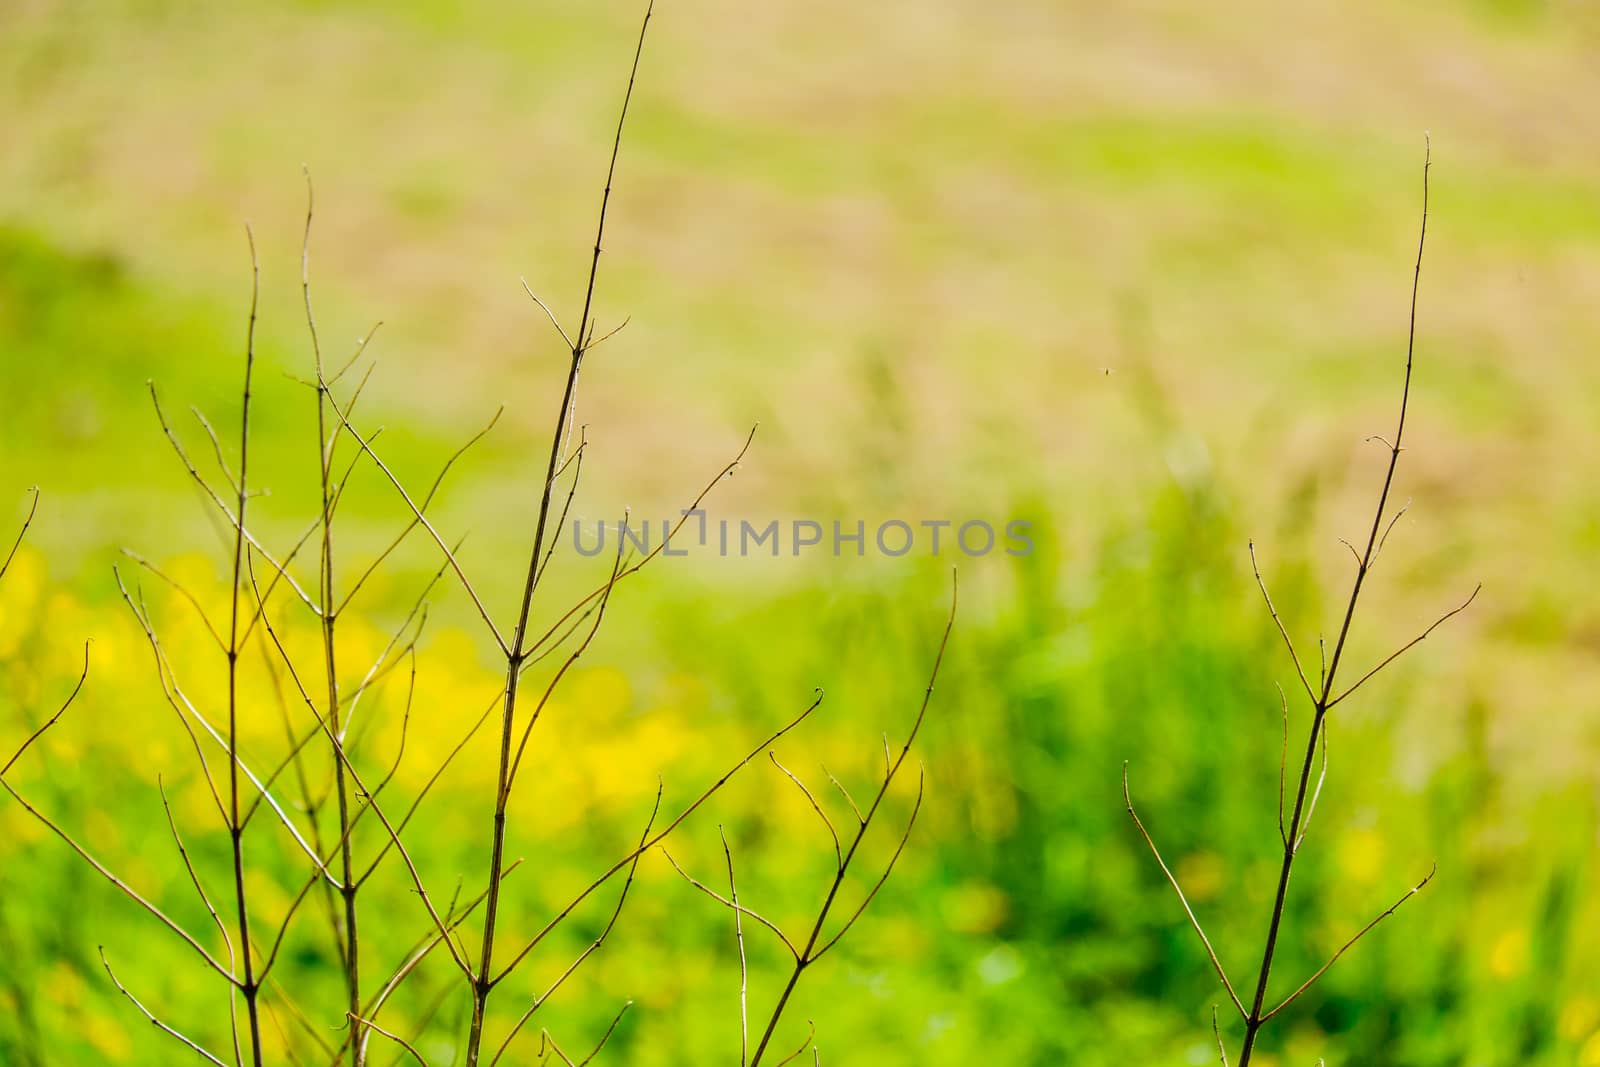 dried twigs from plant in front of field of buttercups by paddythegolfer